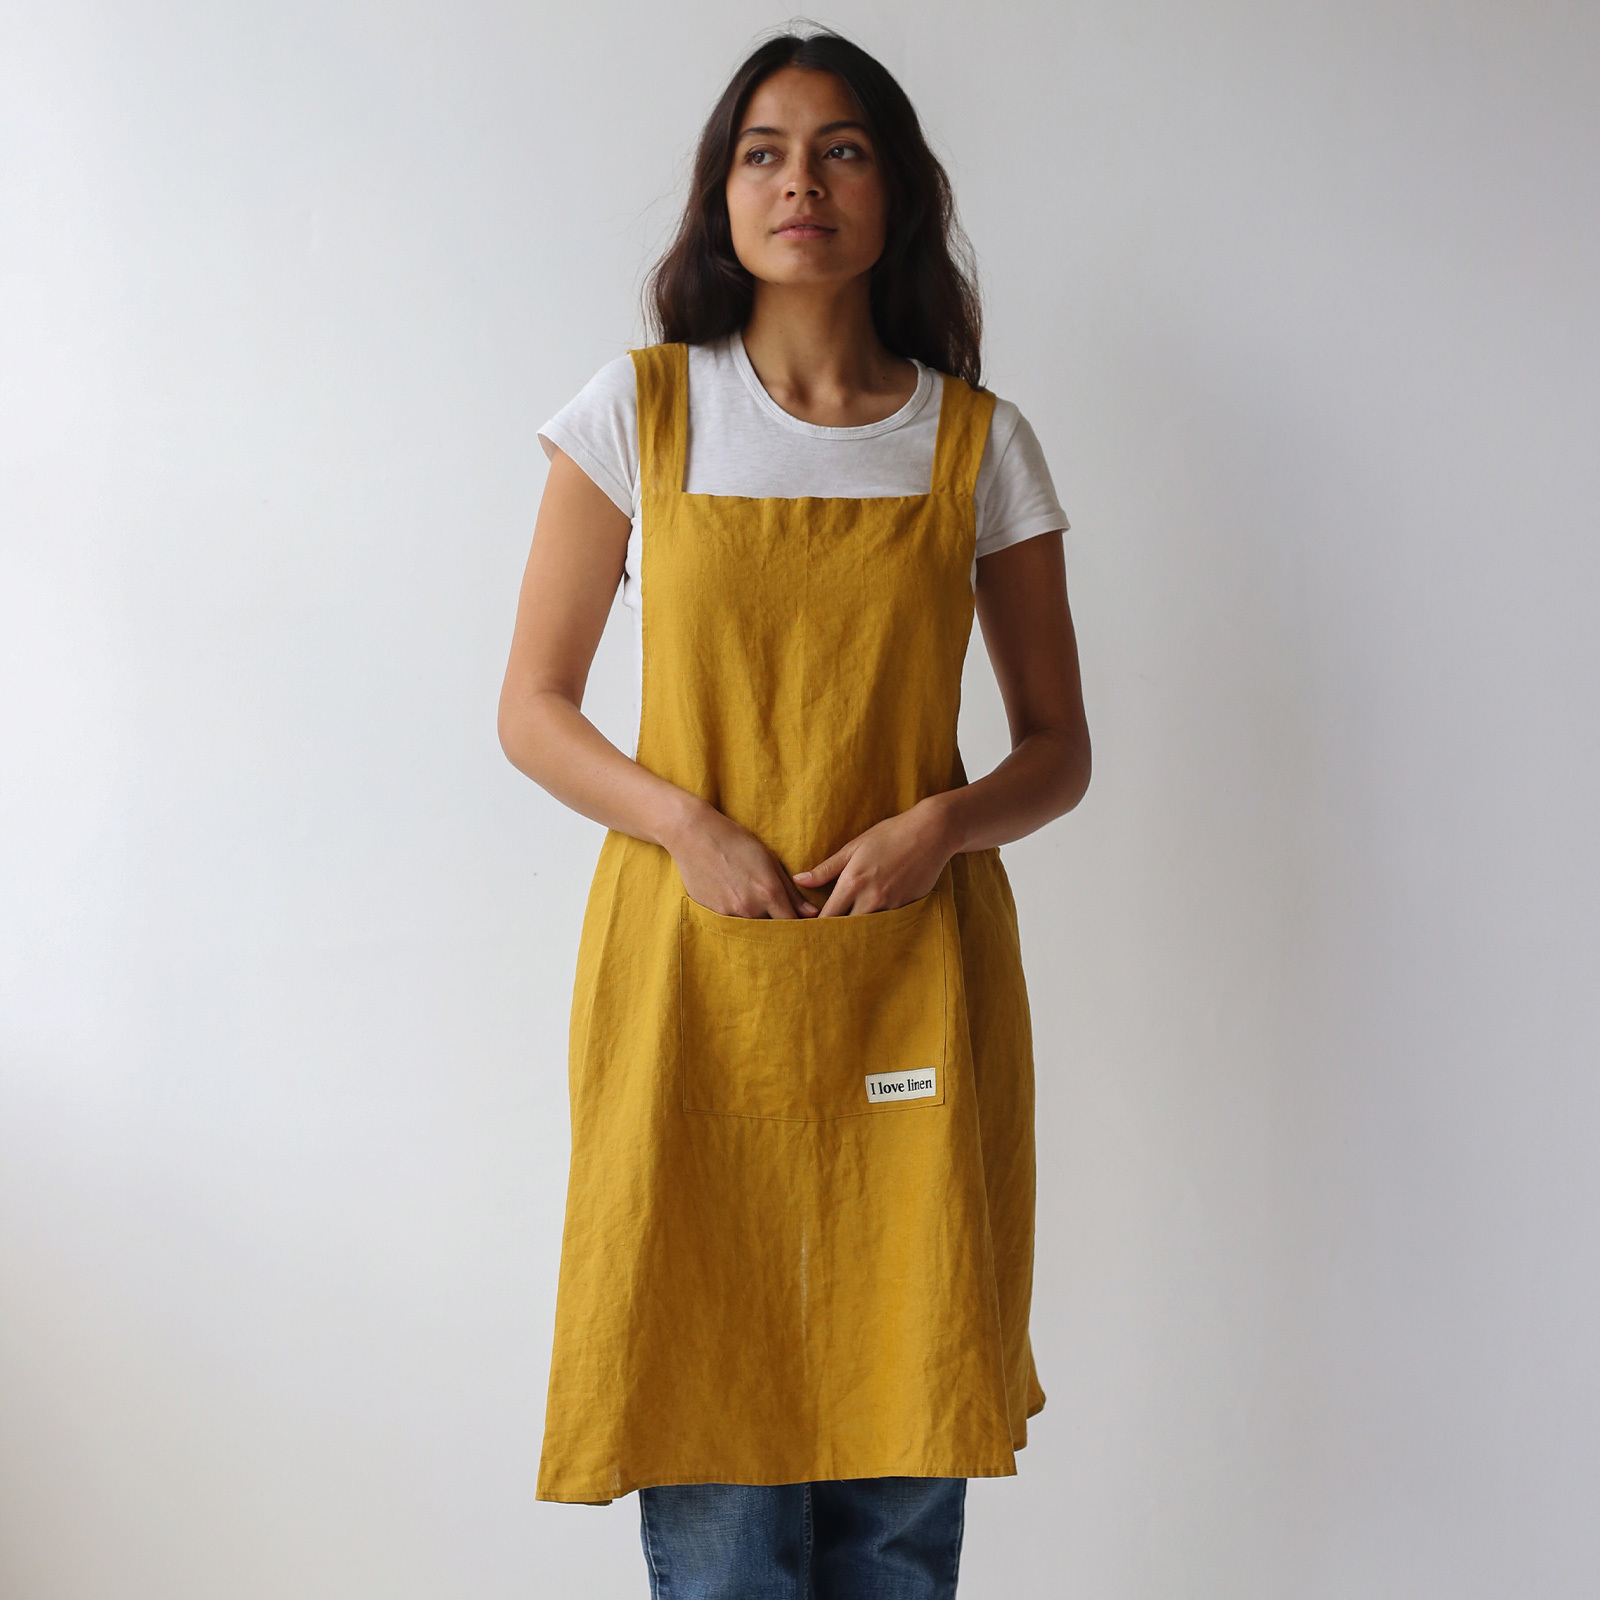 French linen Apron in Mustard